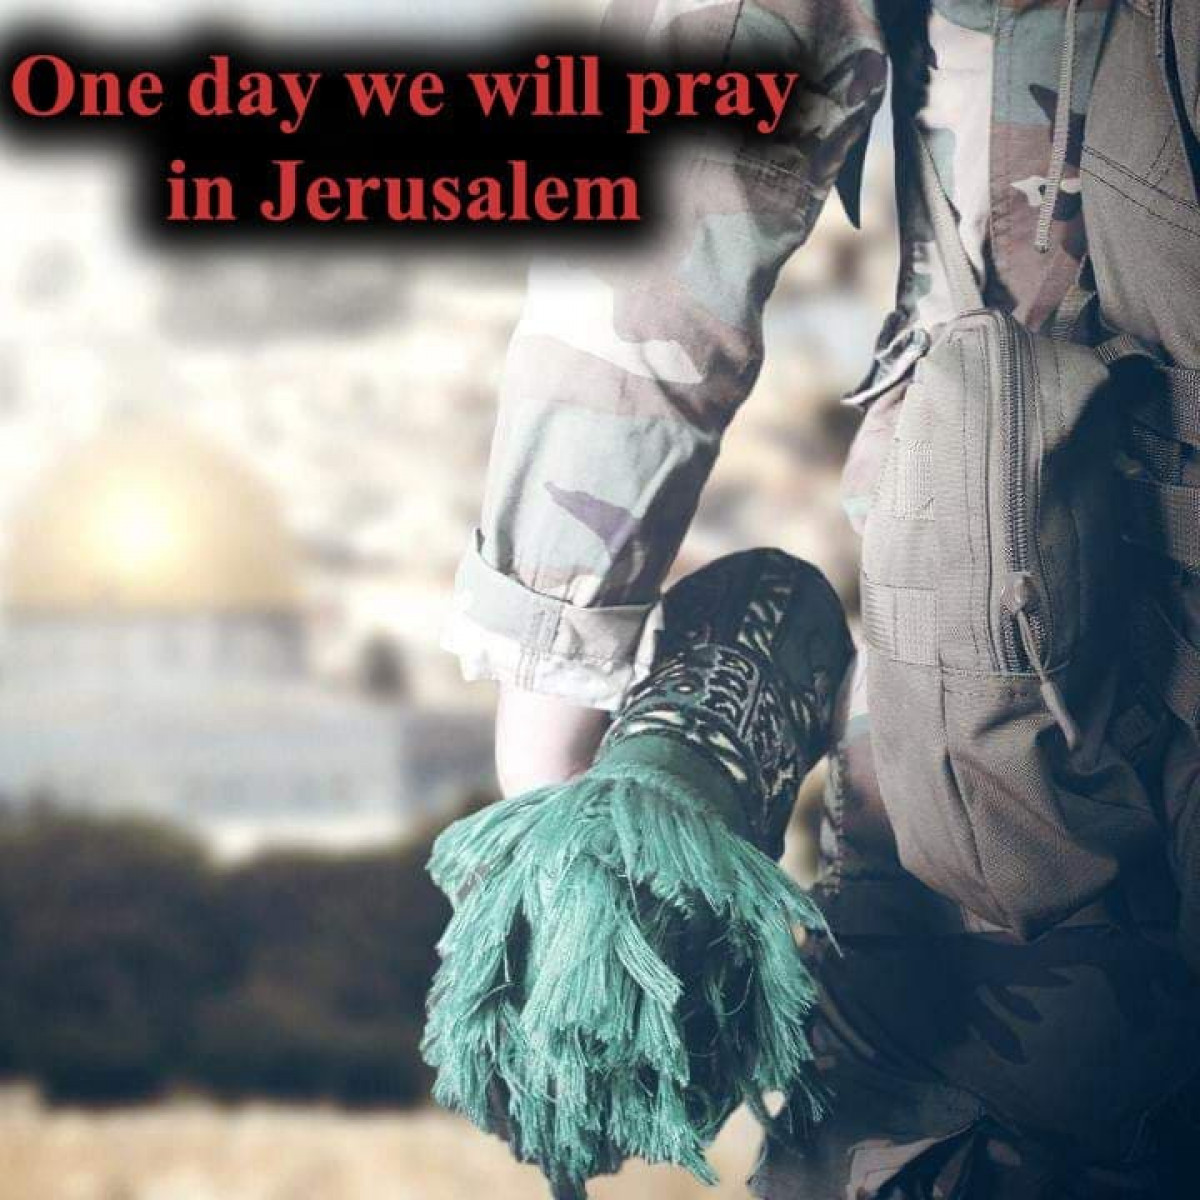 One day we will pray in Jerusalem